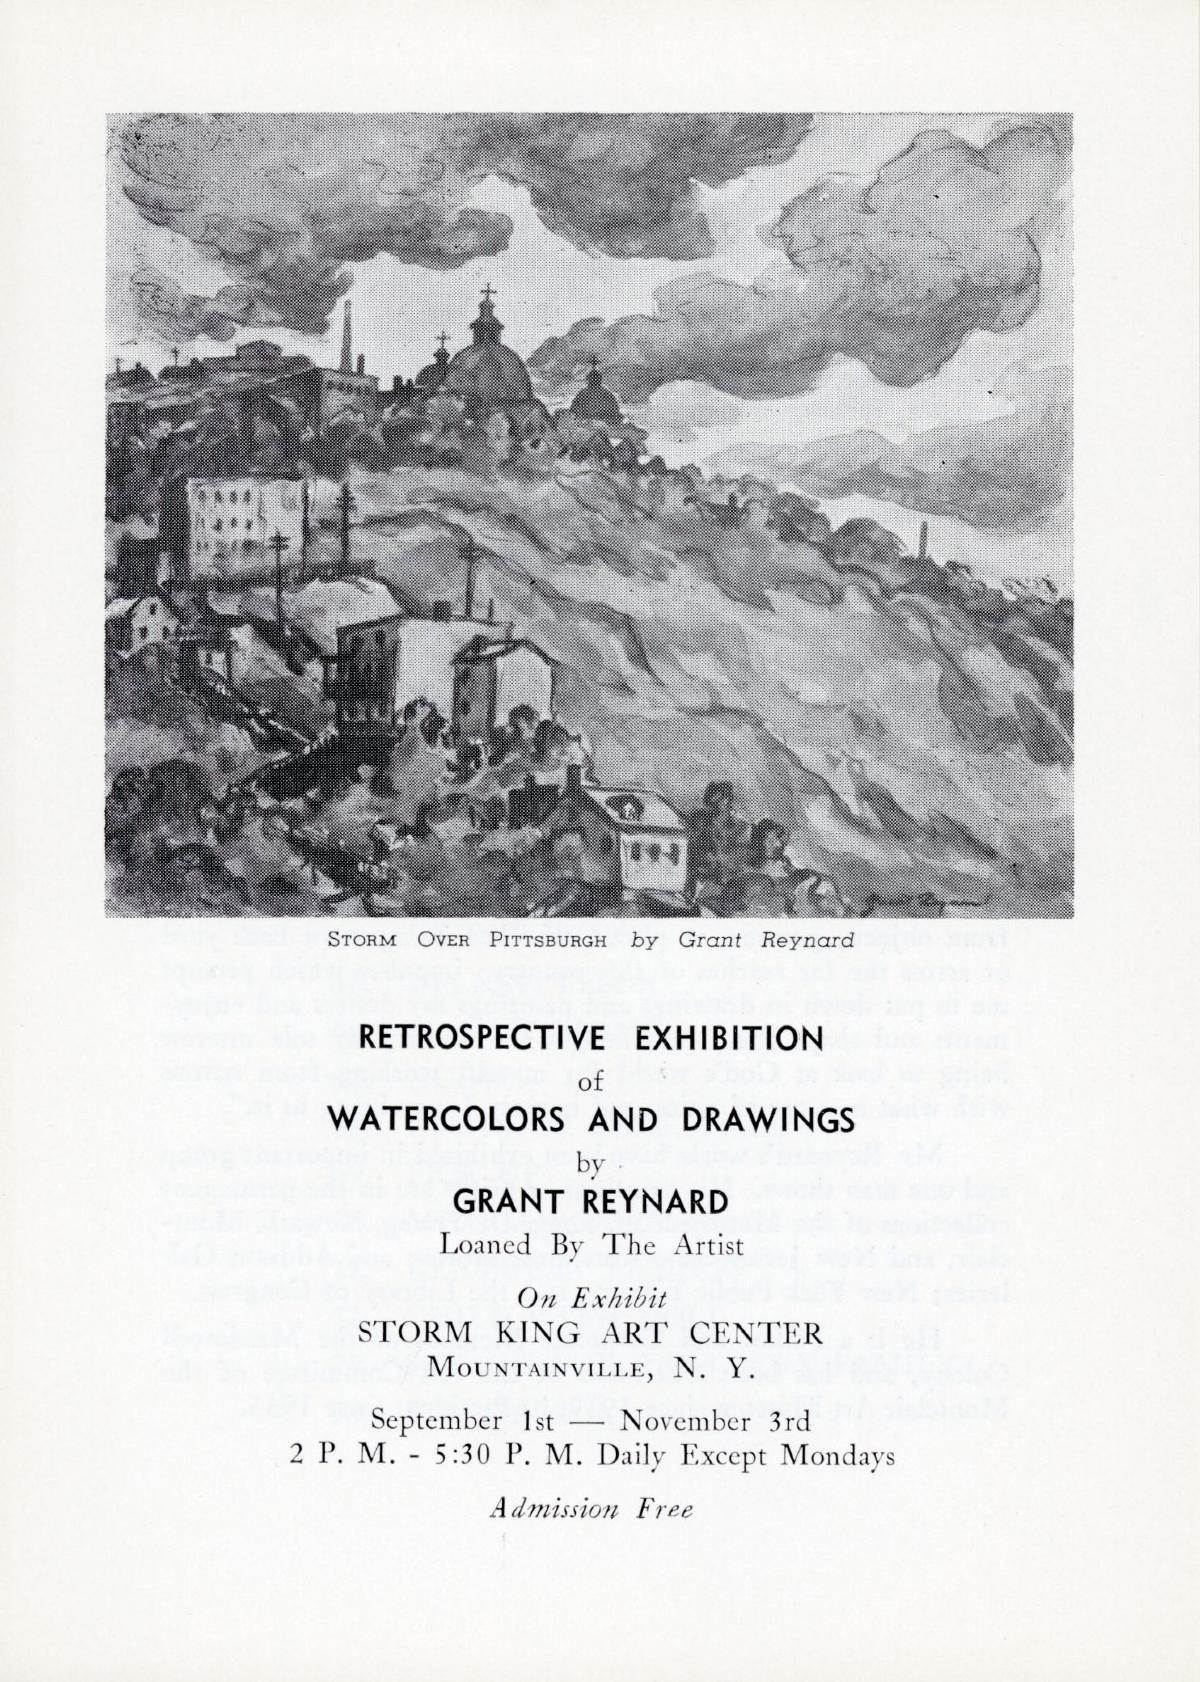 Retrospective Exhibition of Watercolors and Drawings by Grant Reynard, (Loaned by the artist), September 1-November 3, 1963, catalgoue cover